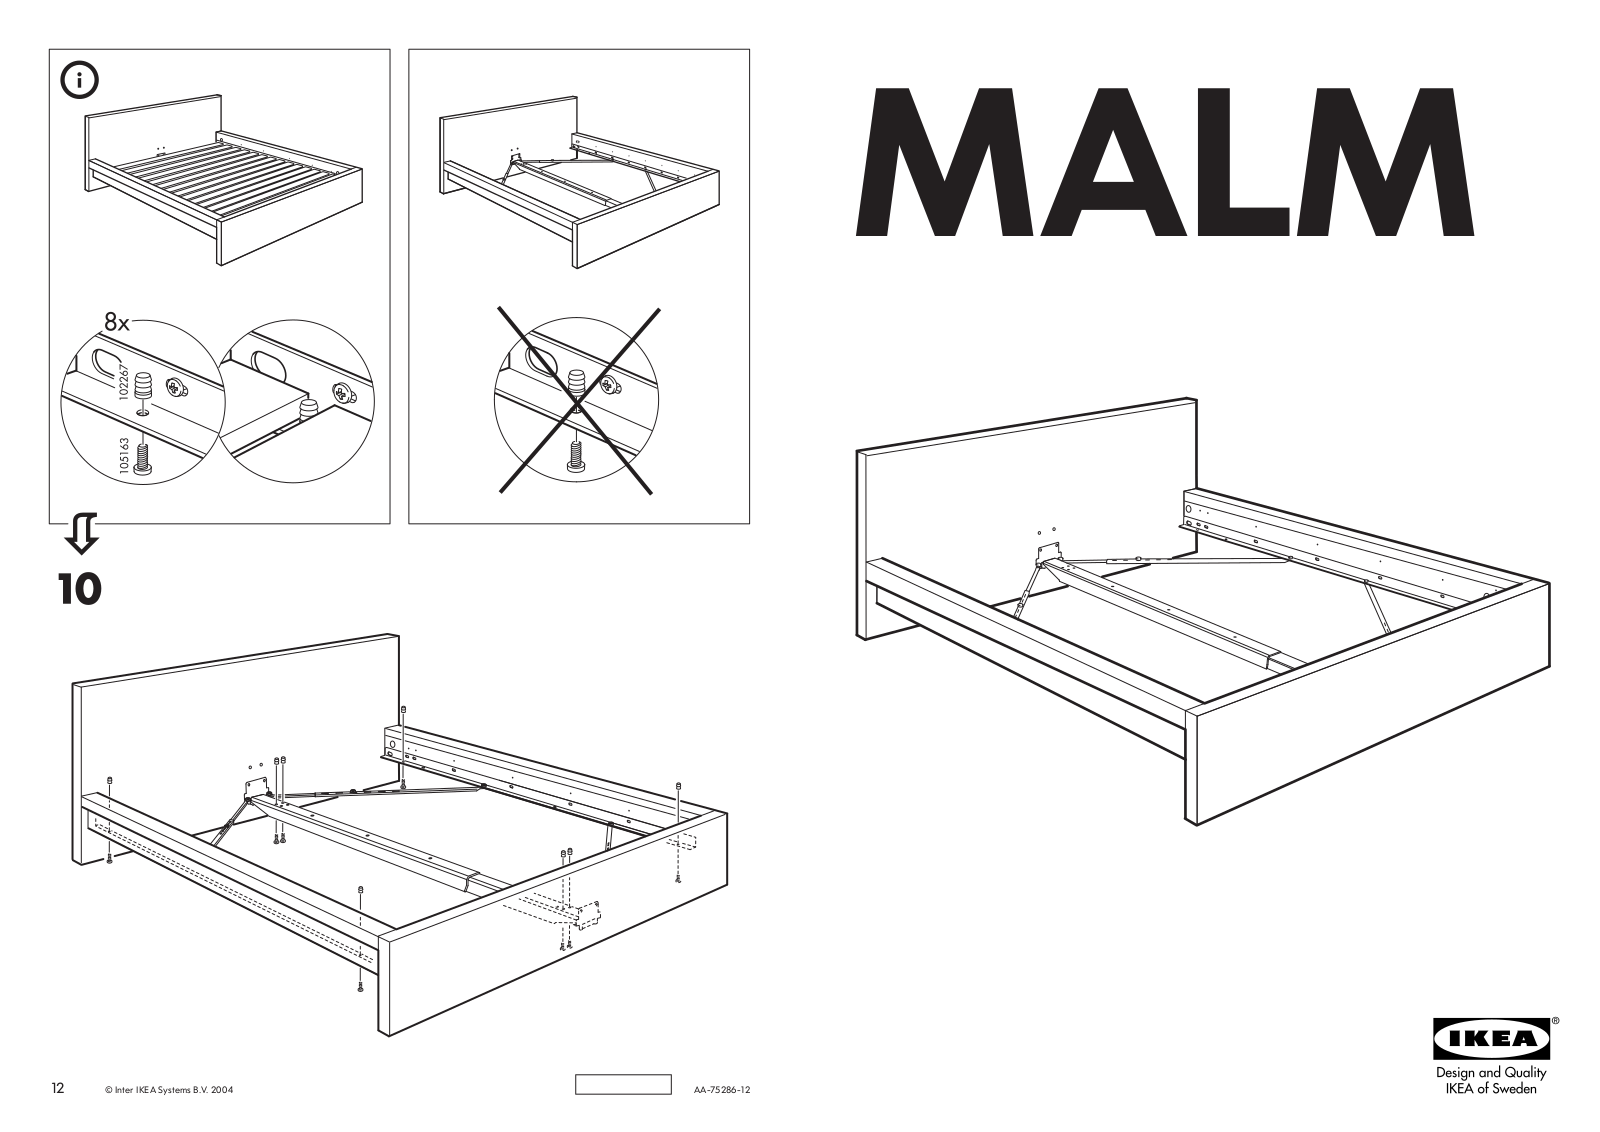 IKEA MALM BED FRAME KING, MALM BED FRAME FULL-DOUBLE, MALM BED FRAME QUEEN Assembly Instruction